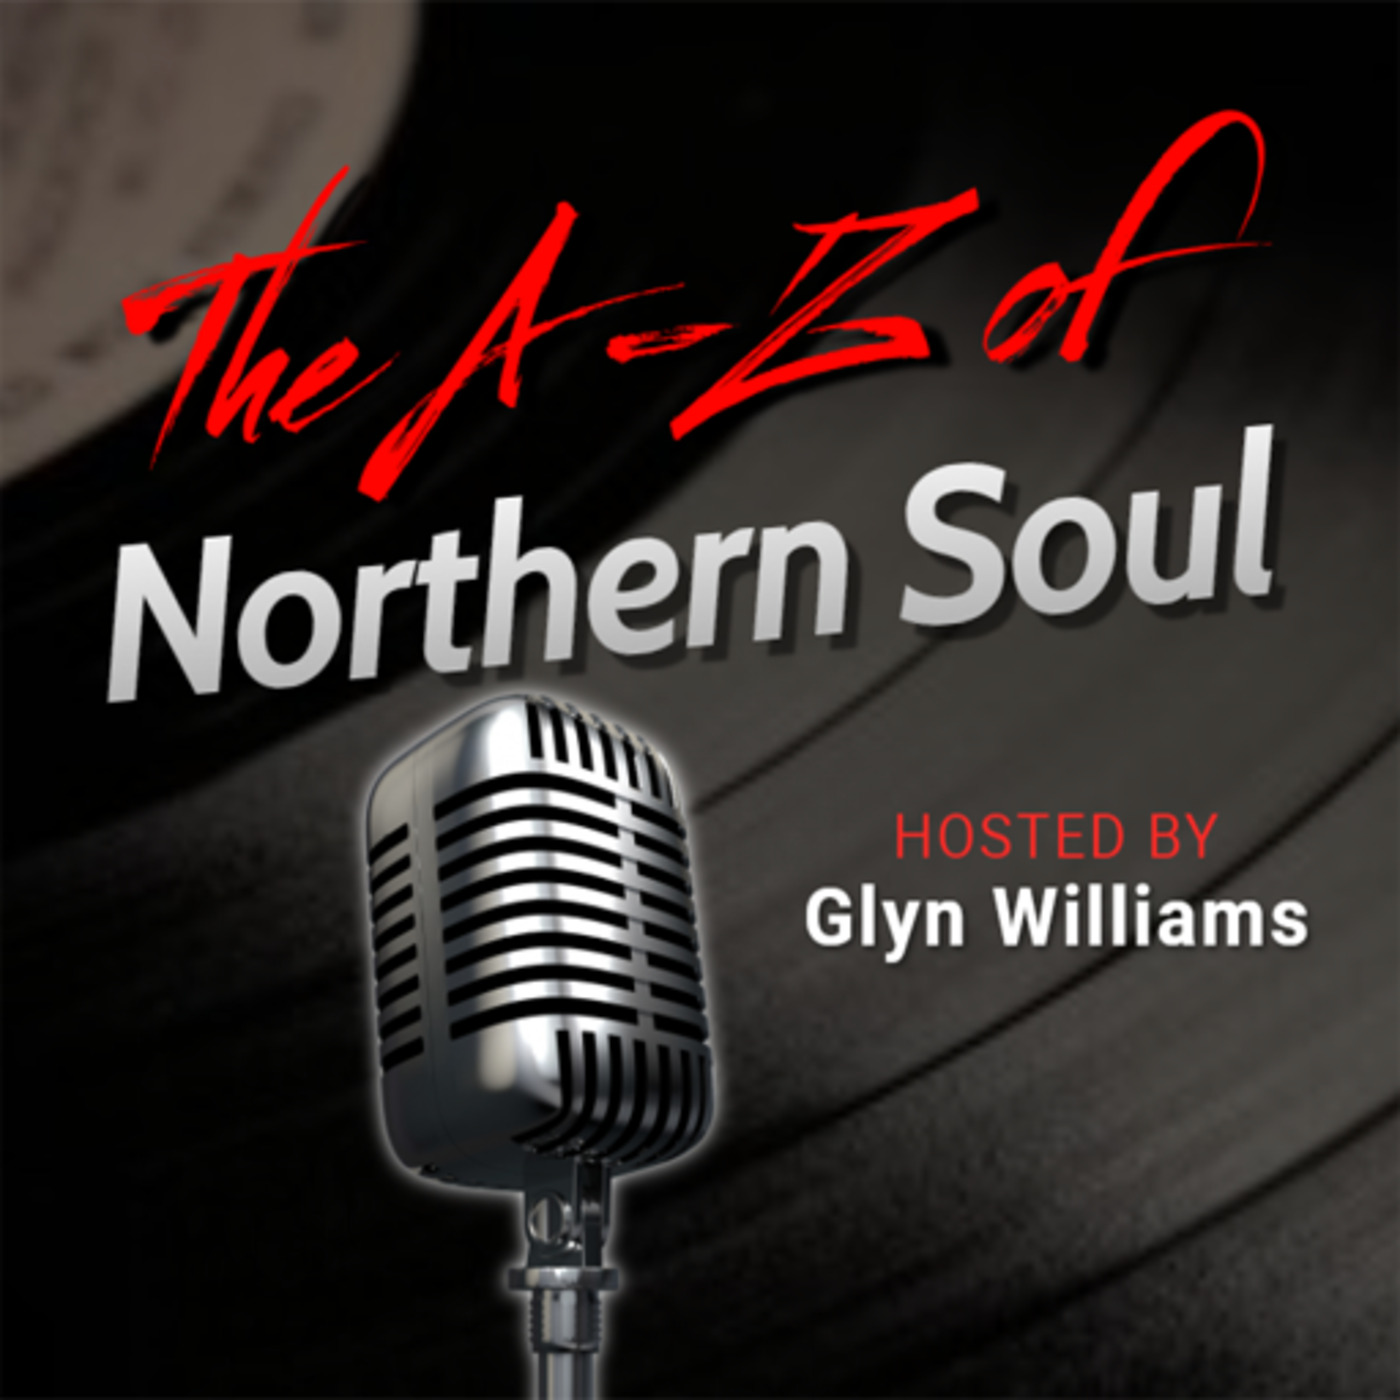 The A-Z of Northern Soul E044